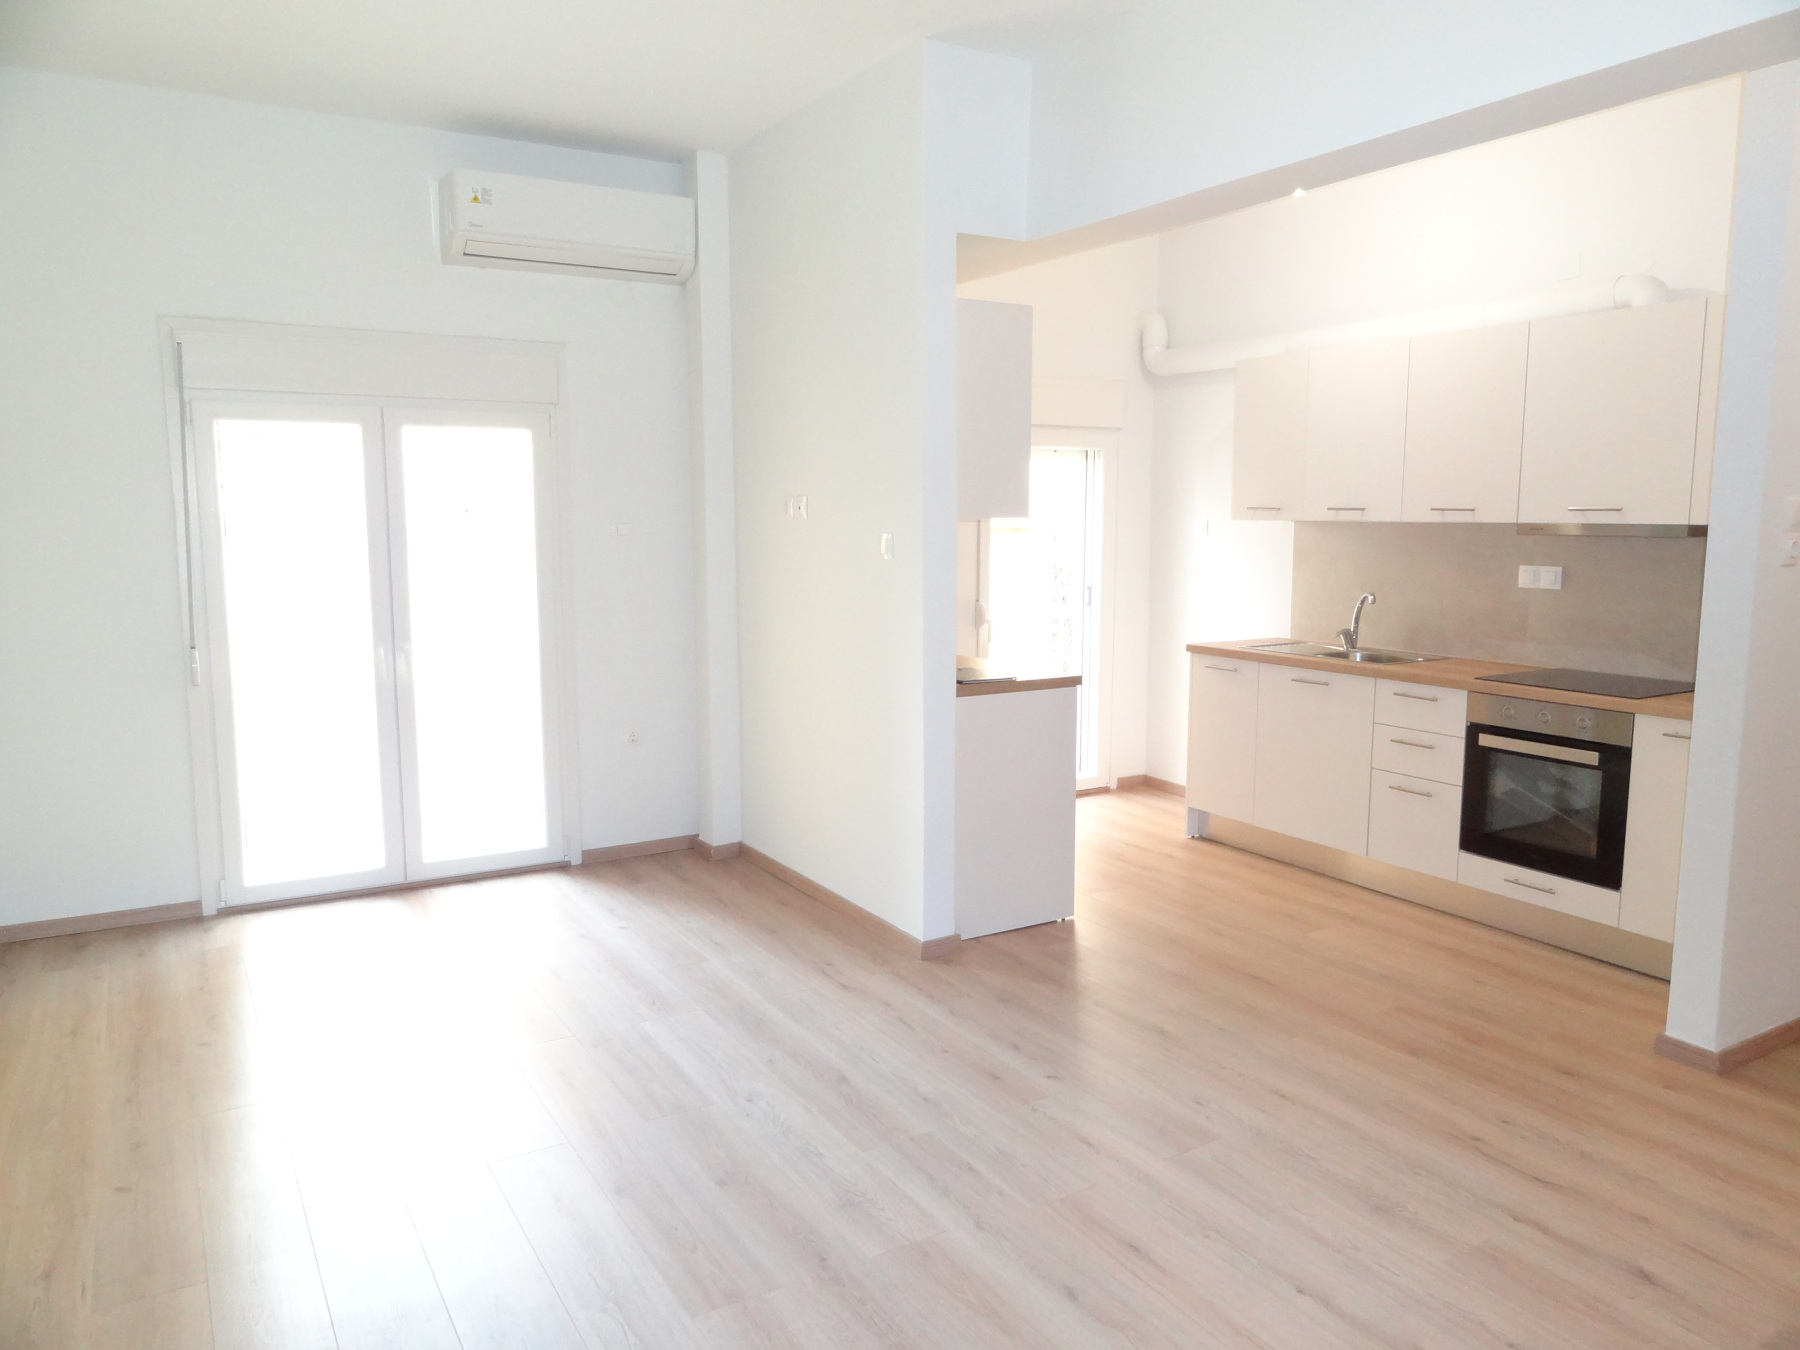 For rent, fully renovated in 2022, 1 bedroom apartment of 55 sq.m. 1st floor in the center of Ioannina near the central Library